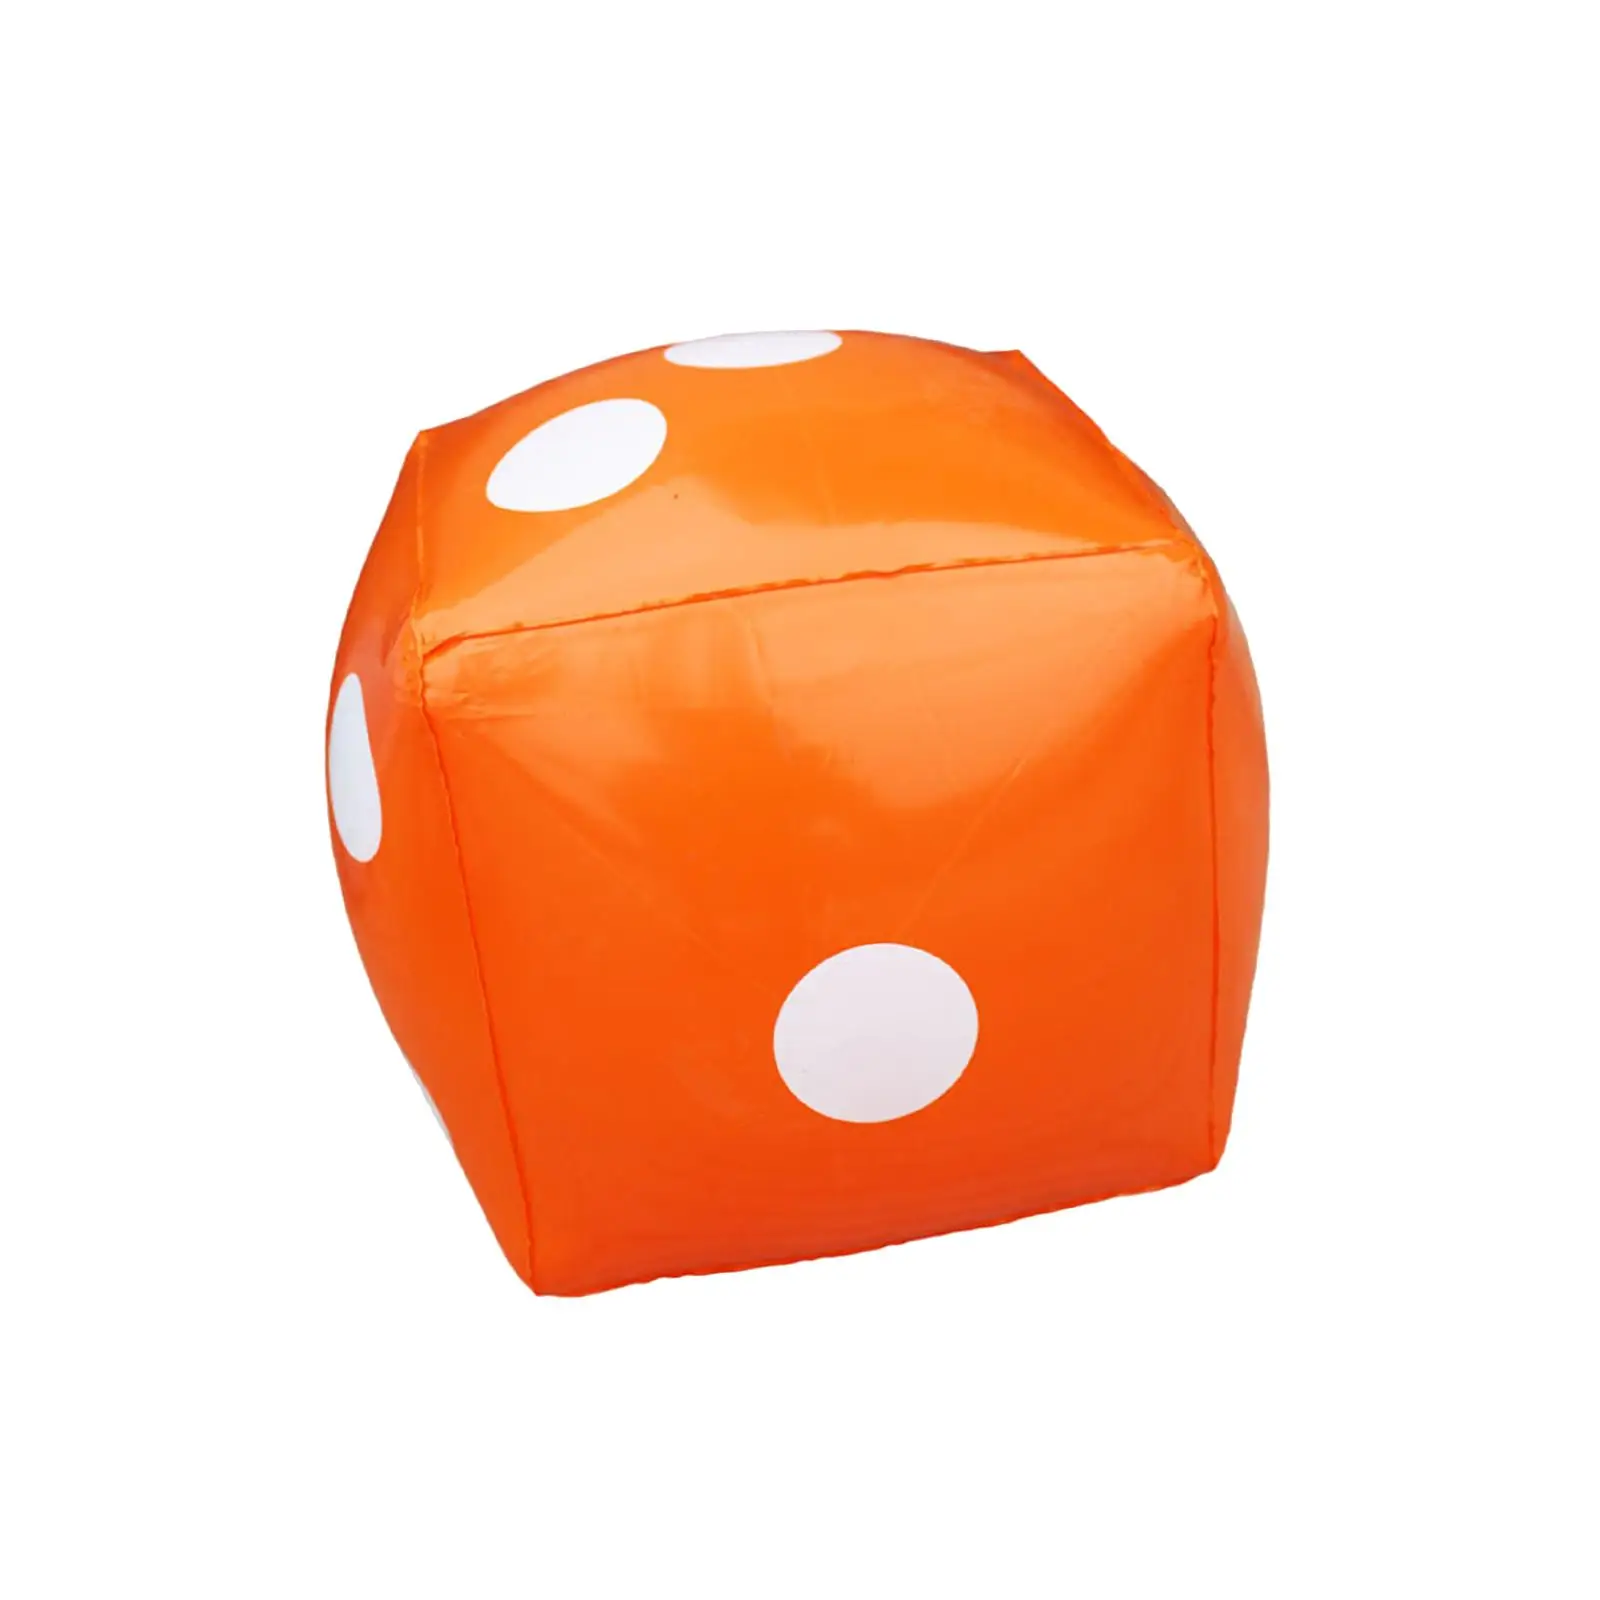 Giant Inflatable Dice Decoration Funny Jumbo Inflatable Dice Beach Inflatable Dice for Kids Toys Indoor Outdoor Bars Home Pools